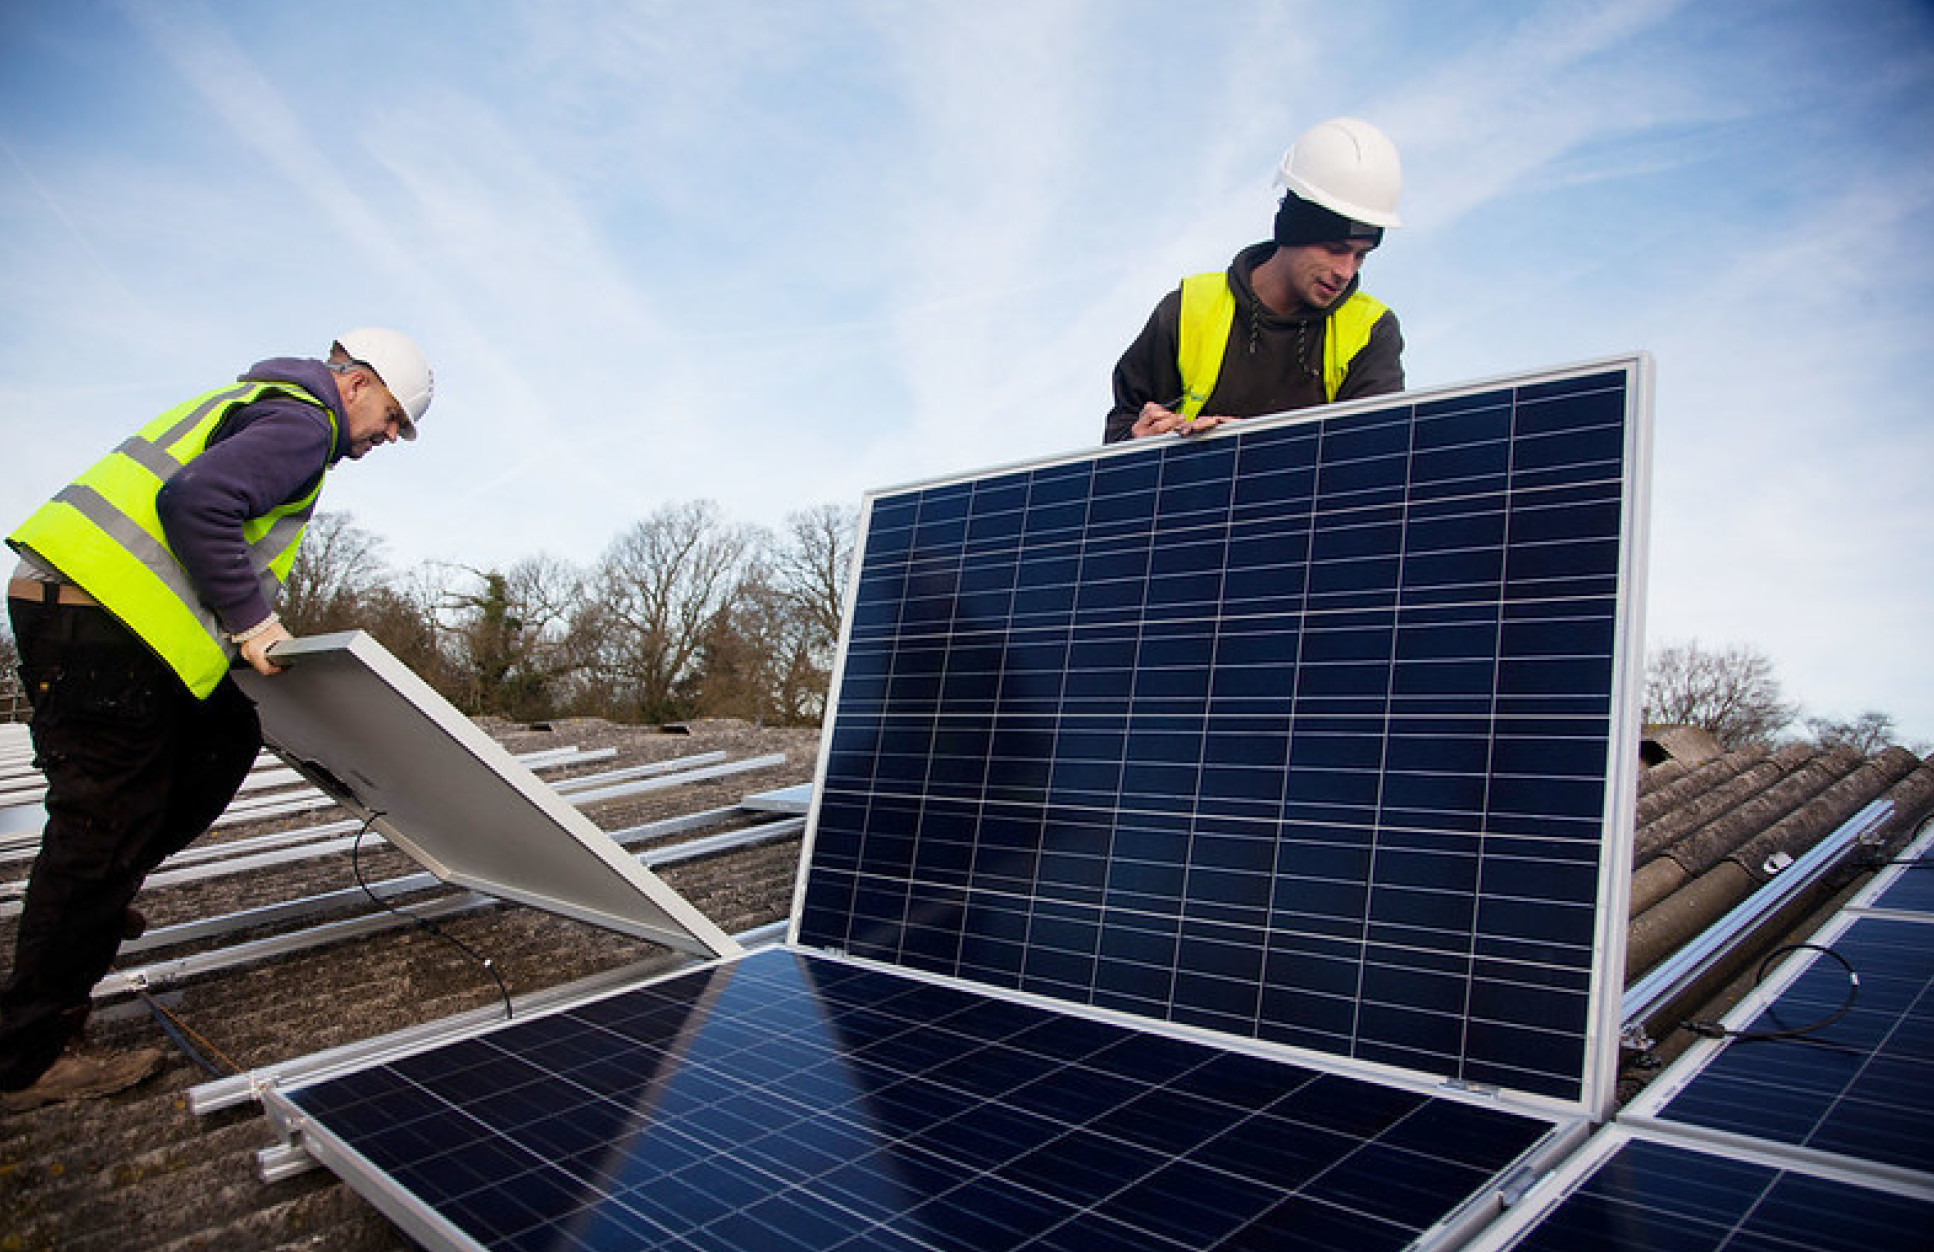 Andy Tyrrell and Jake Beautyman install solar panels on a barn roof on Grange farm, near Balcombe - c - Kristian Buus - Licensed under 2.0 Generic CC BY 2.0